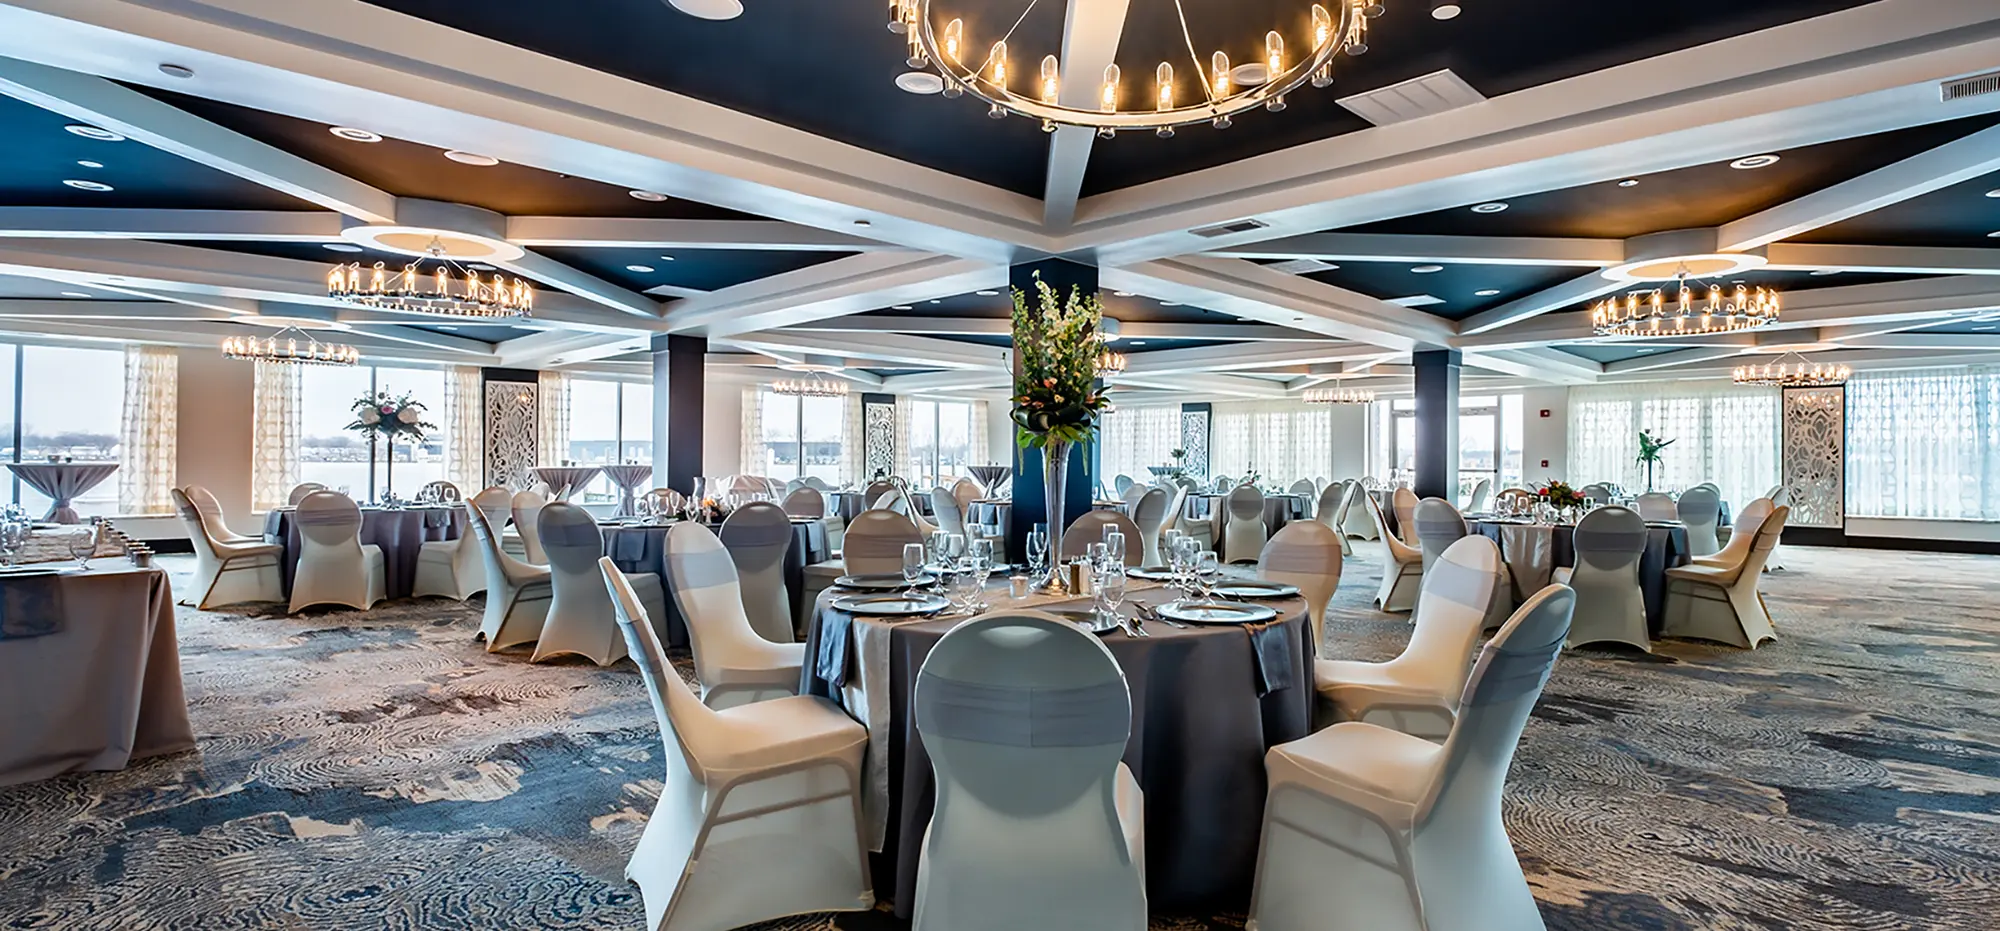 Large rom area with dark grey tables all around, dark tan chairs, glass cups, plates, forks, knifes, big circular glass lit chandeliers, and many other wedding assortment objects inside at the Holiday Inn Spring Lake-Grand Haven venue